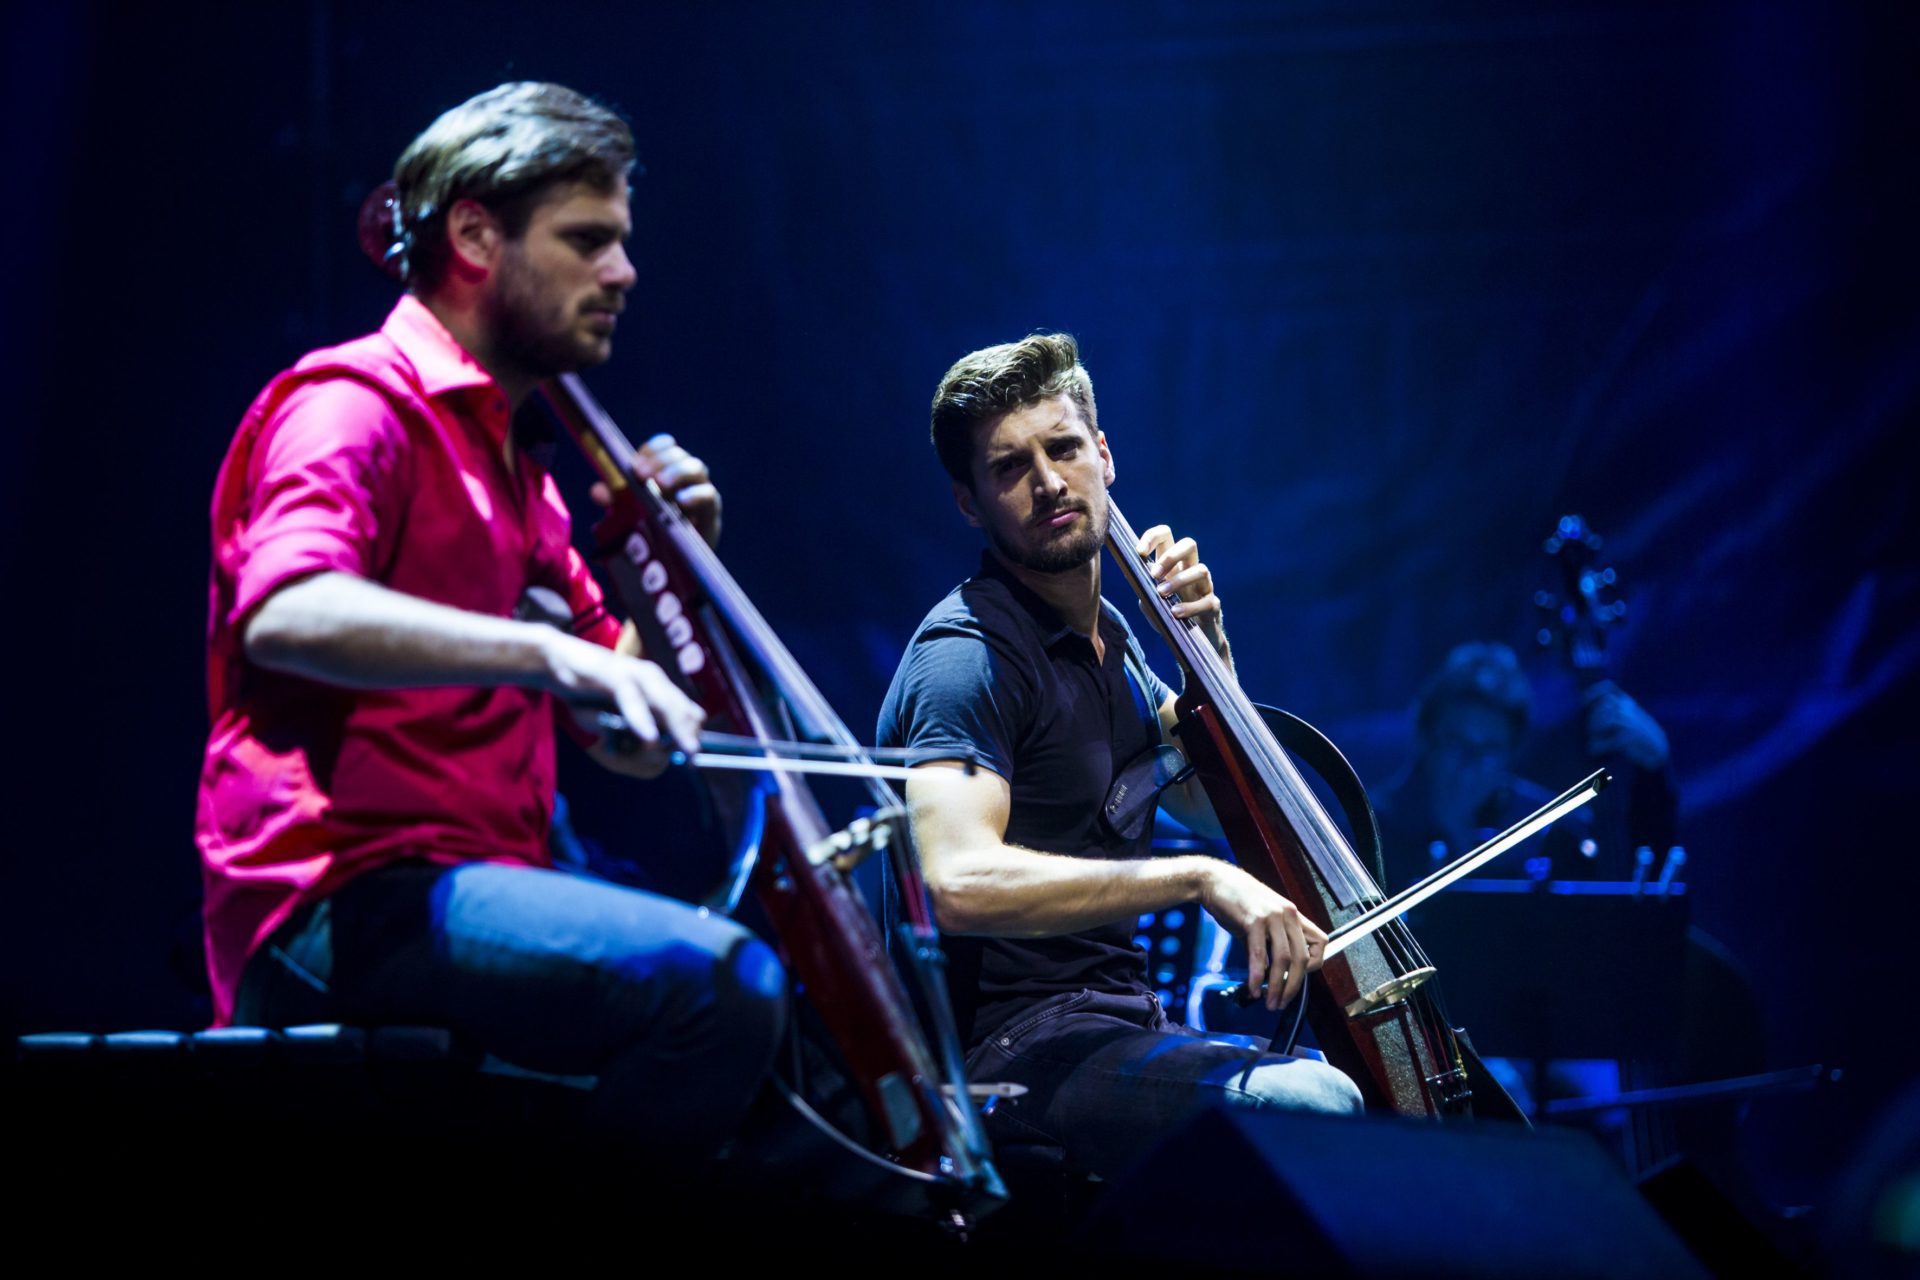 2CELLOS Announce Let There Be Cello U.S. Tour in 2019